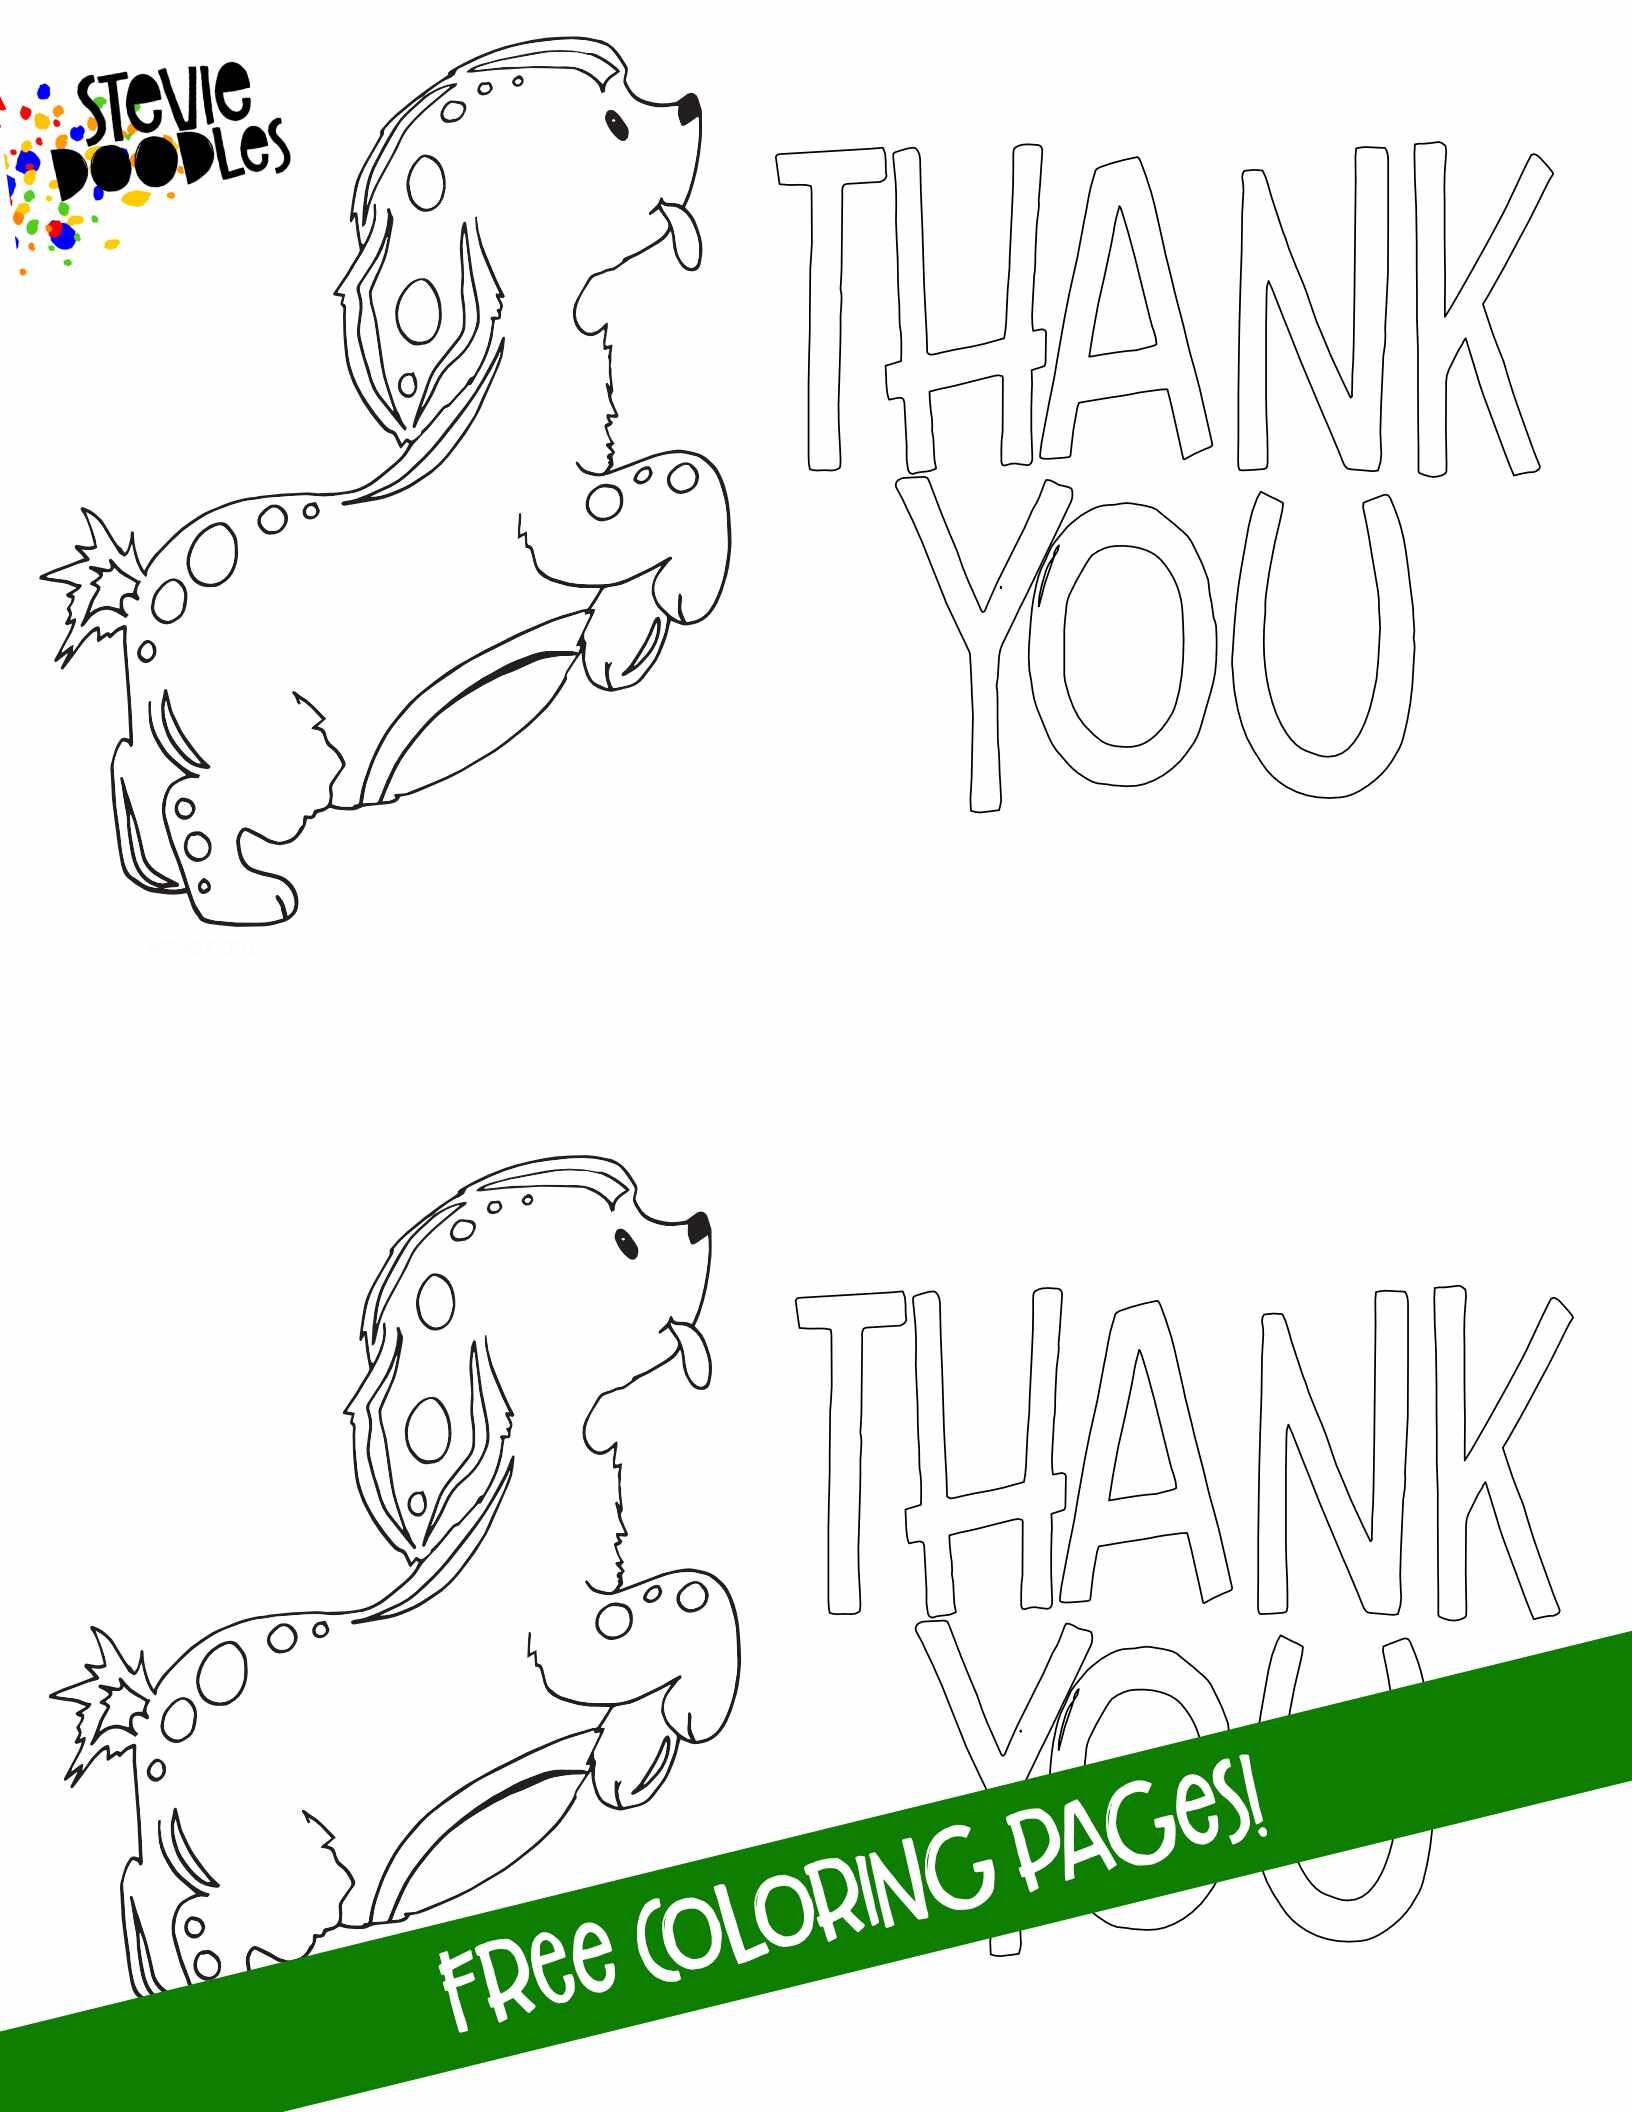 Free Dog coloring page  Over 1000 Free Coloring Pages at Stevie Doodles CLICK HERE TO DOWNLOAD THE PAGE ABOVE